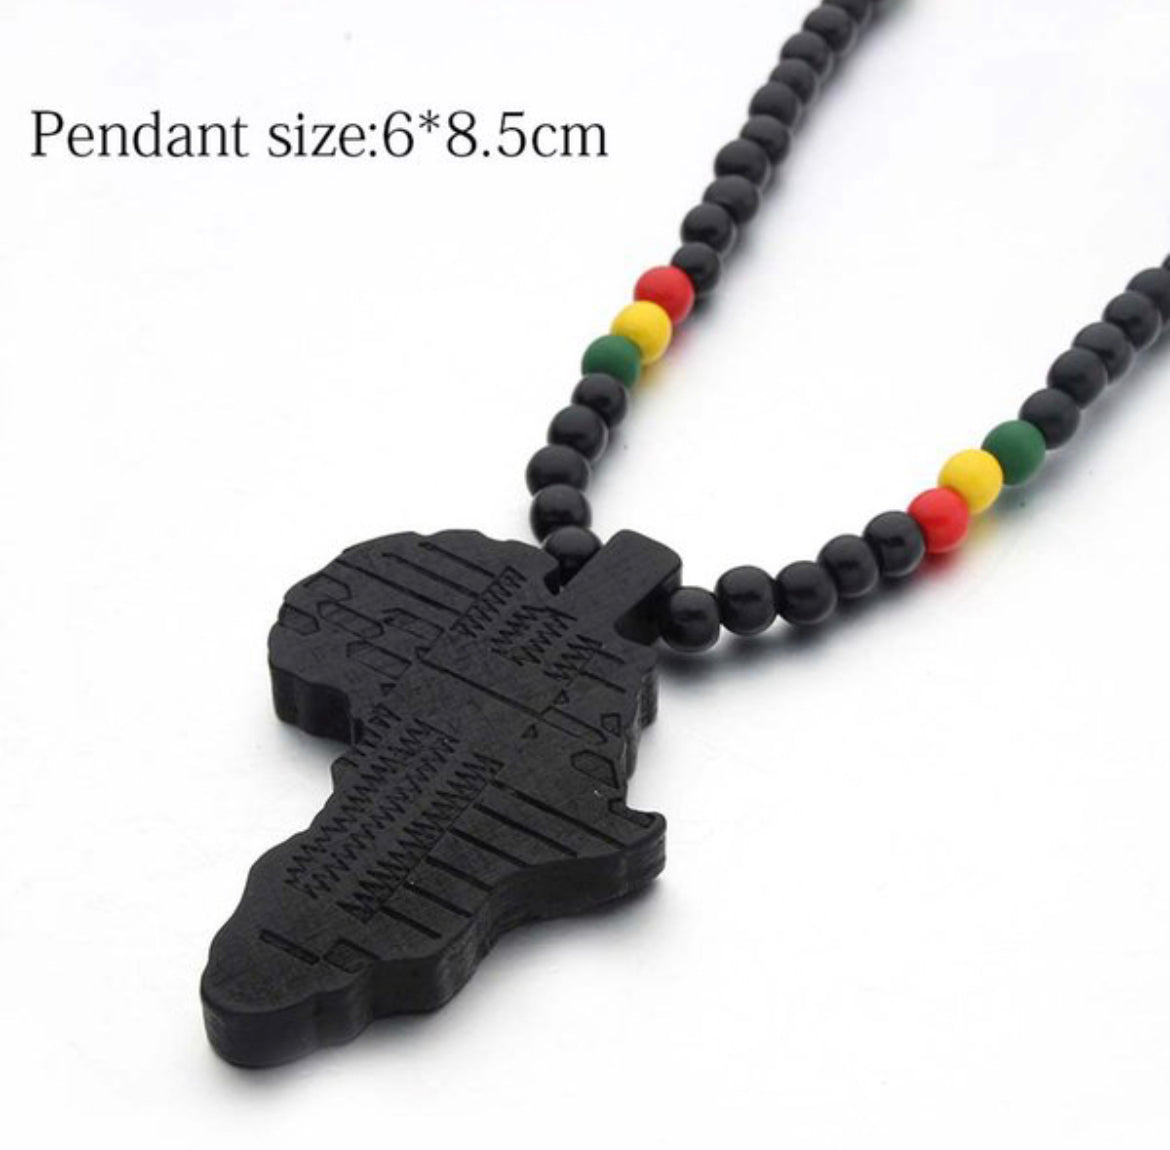 Afrocentric Map Beaded Wooden Necklace